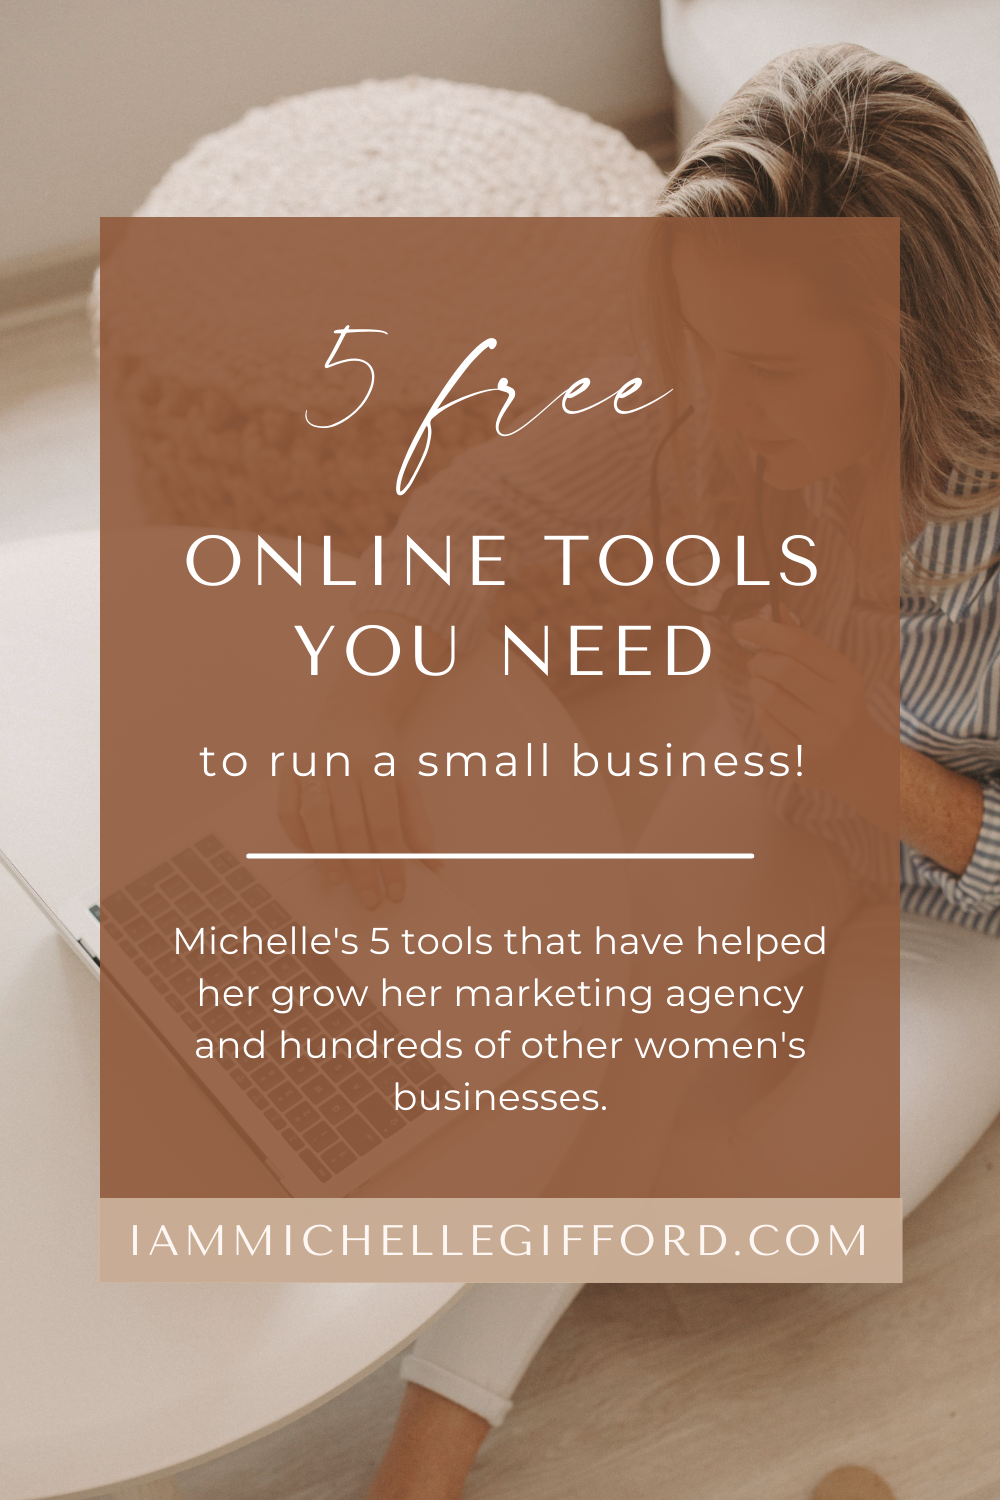 5 free online tools for small business growth iammichellegifford.com.